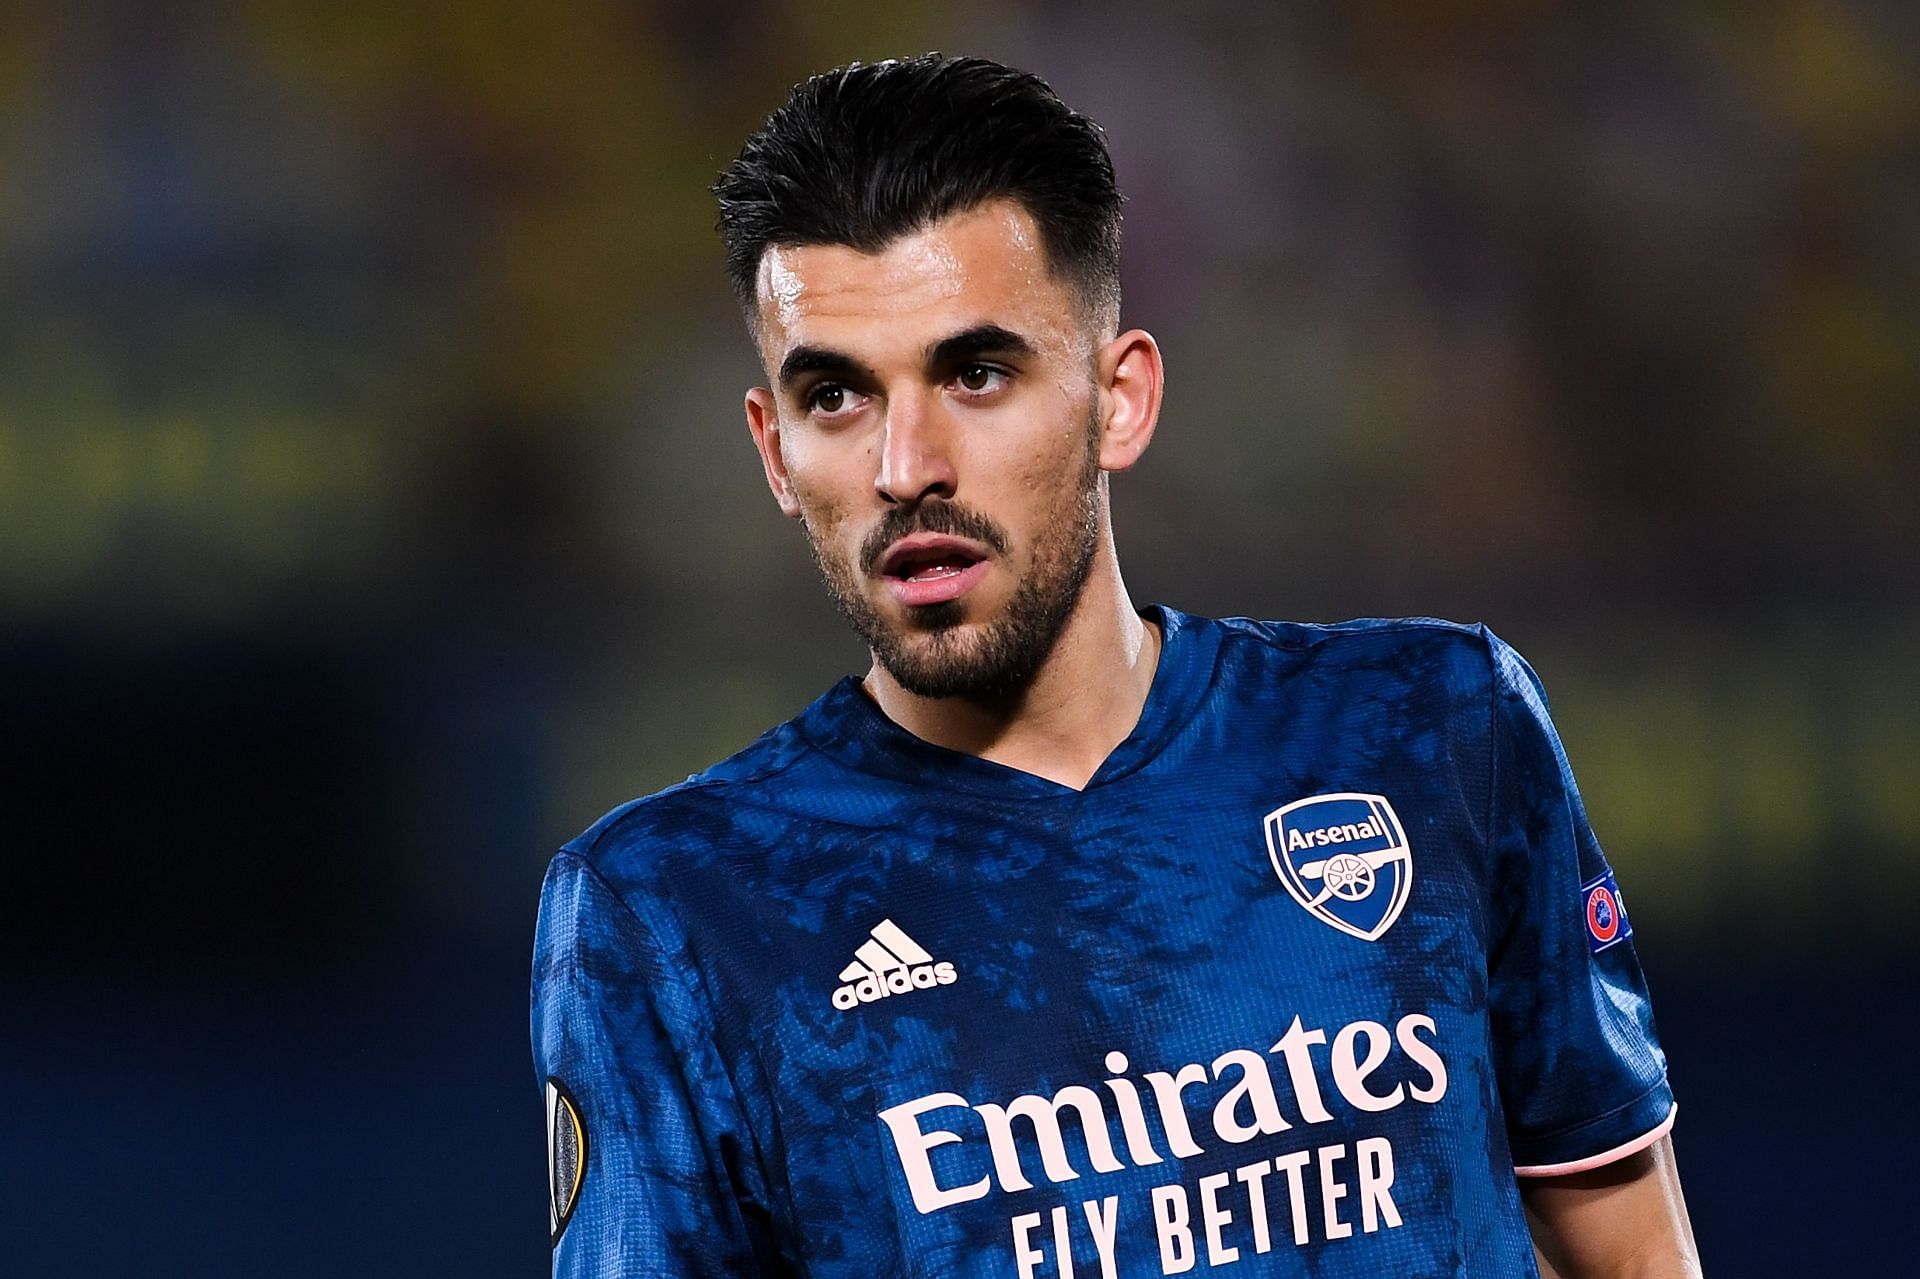 Dani Ceballos missed his family while with the Gunners.